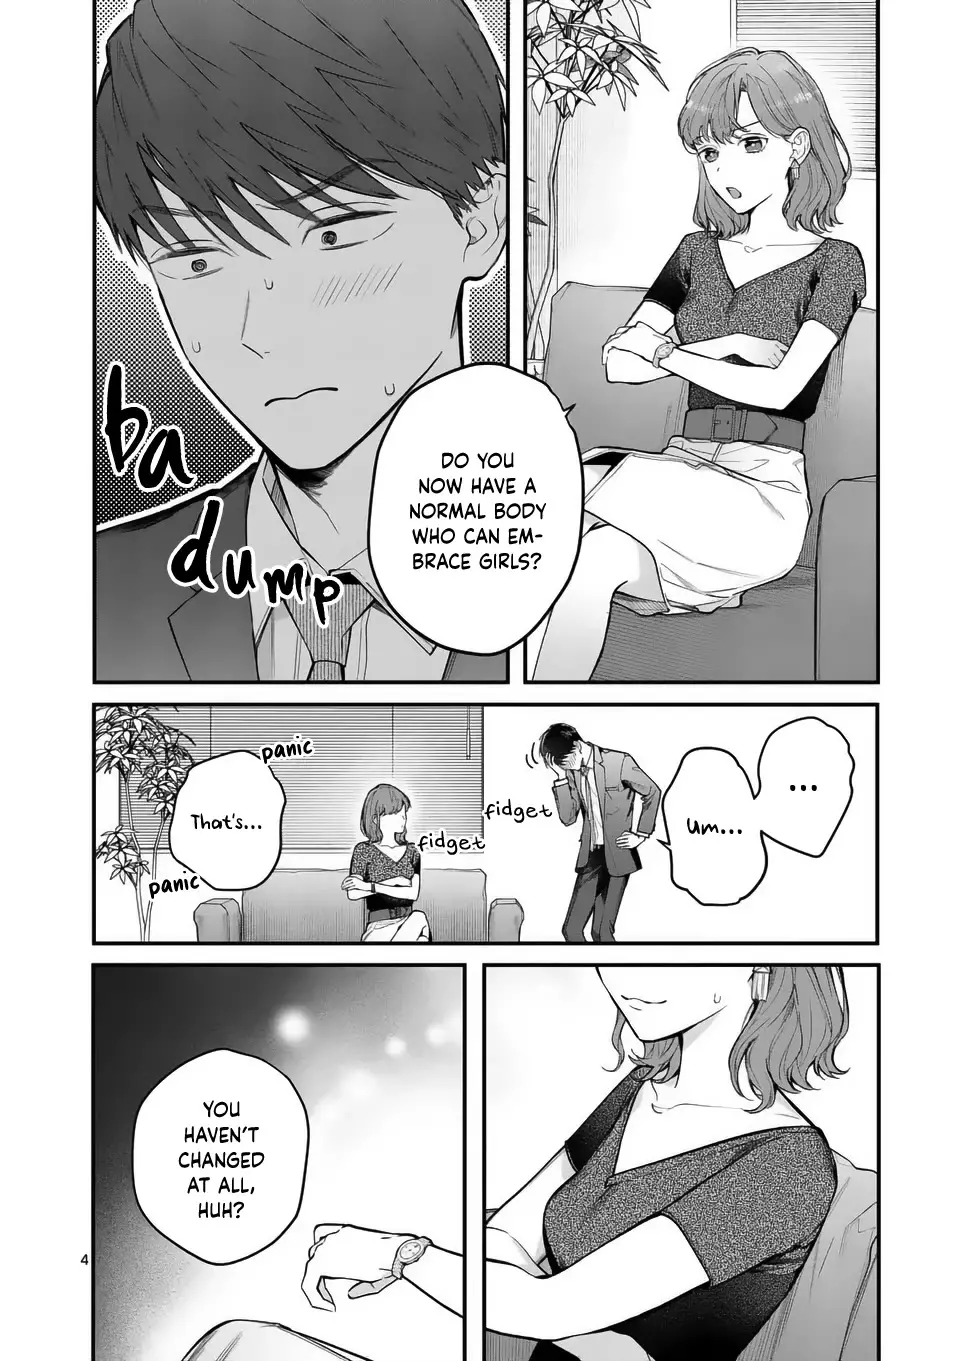 Is It Wrong To Get Done By A Girl? - 9 page 5